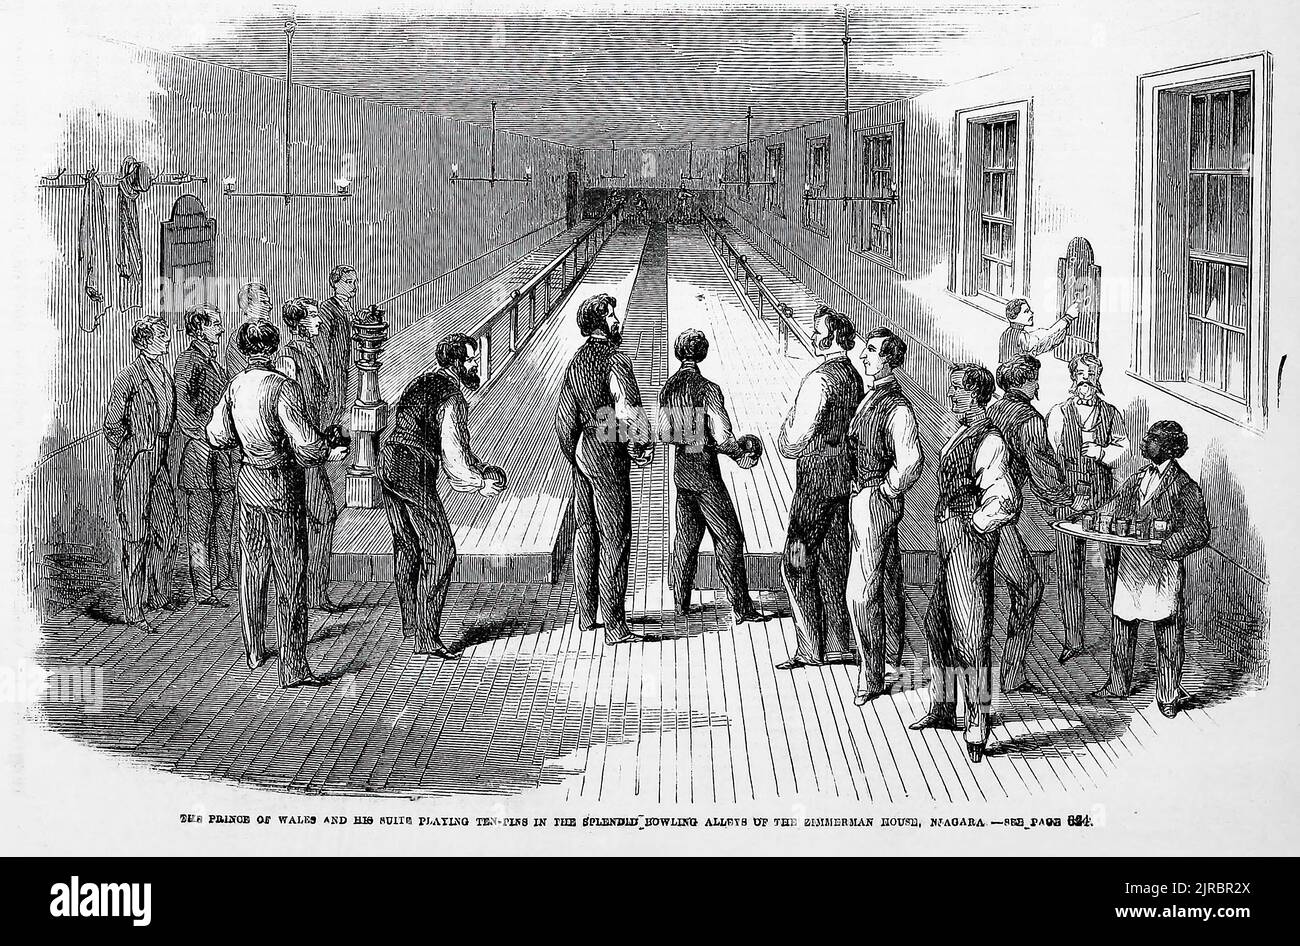 The Prince of Wales and his suite playing ten-pins in the splendid bowling alley of the Zimmerman House, Niagara. 1860 visit of the Prince of Wales, Edward Albert, to America. 19th century illustration from Frank Leslie's Illustrated Newspaper Stock Photo